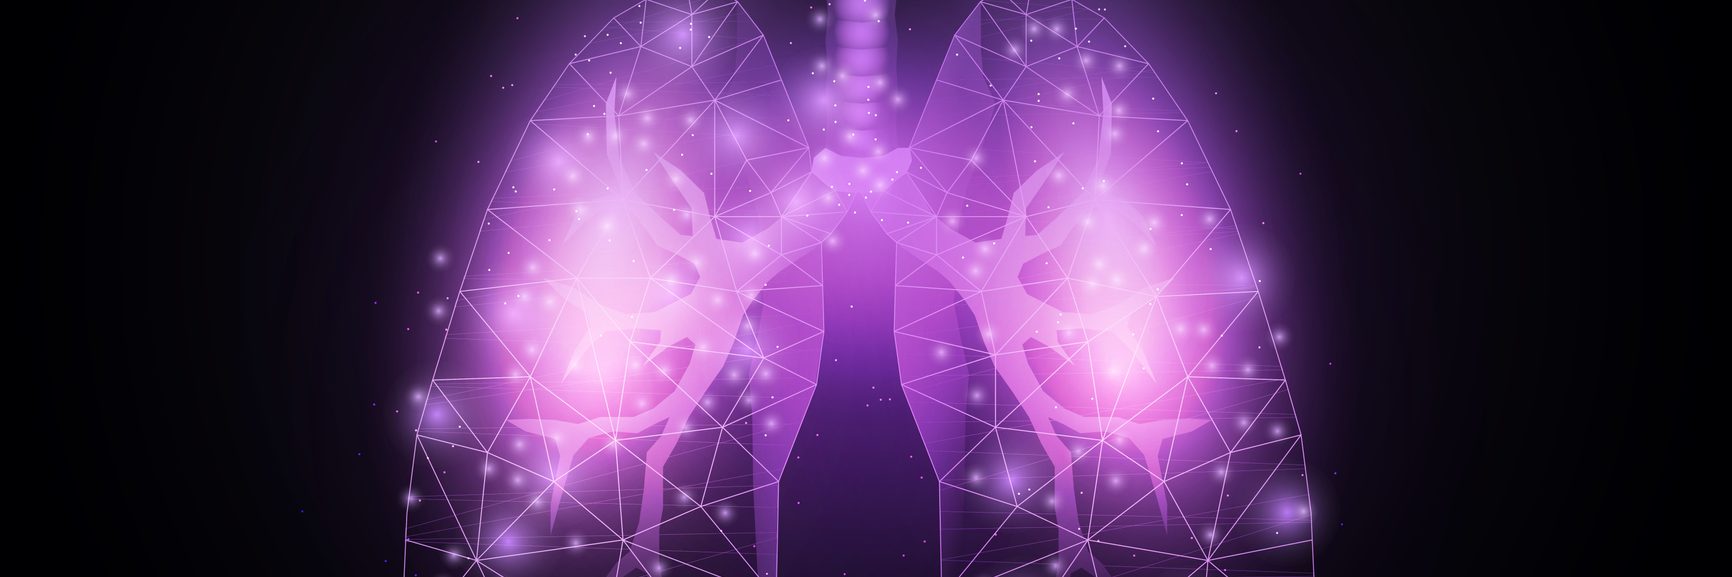 In Advanced NSCLC, Treatment Based on Biomarker Testing Improves Survival